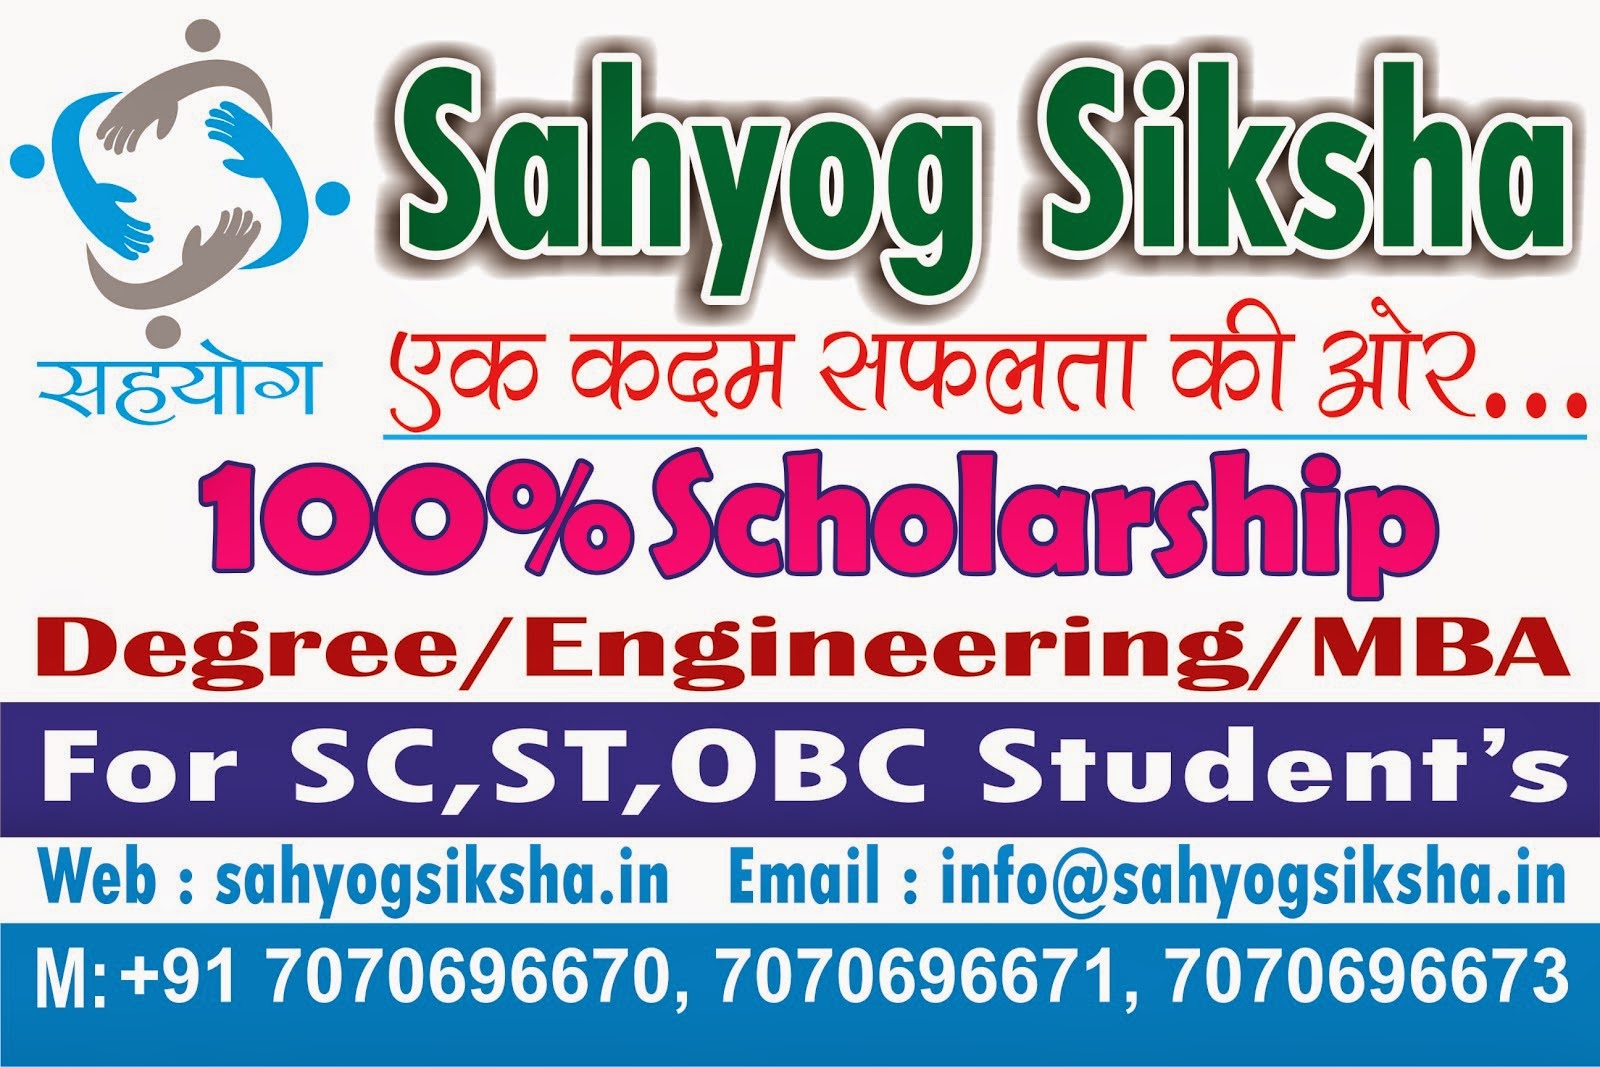 Scholarship for SC/ST/OBC